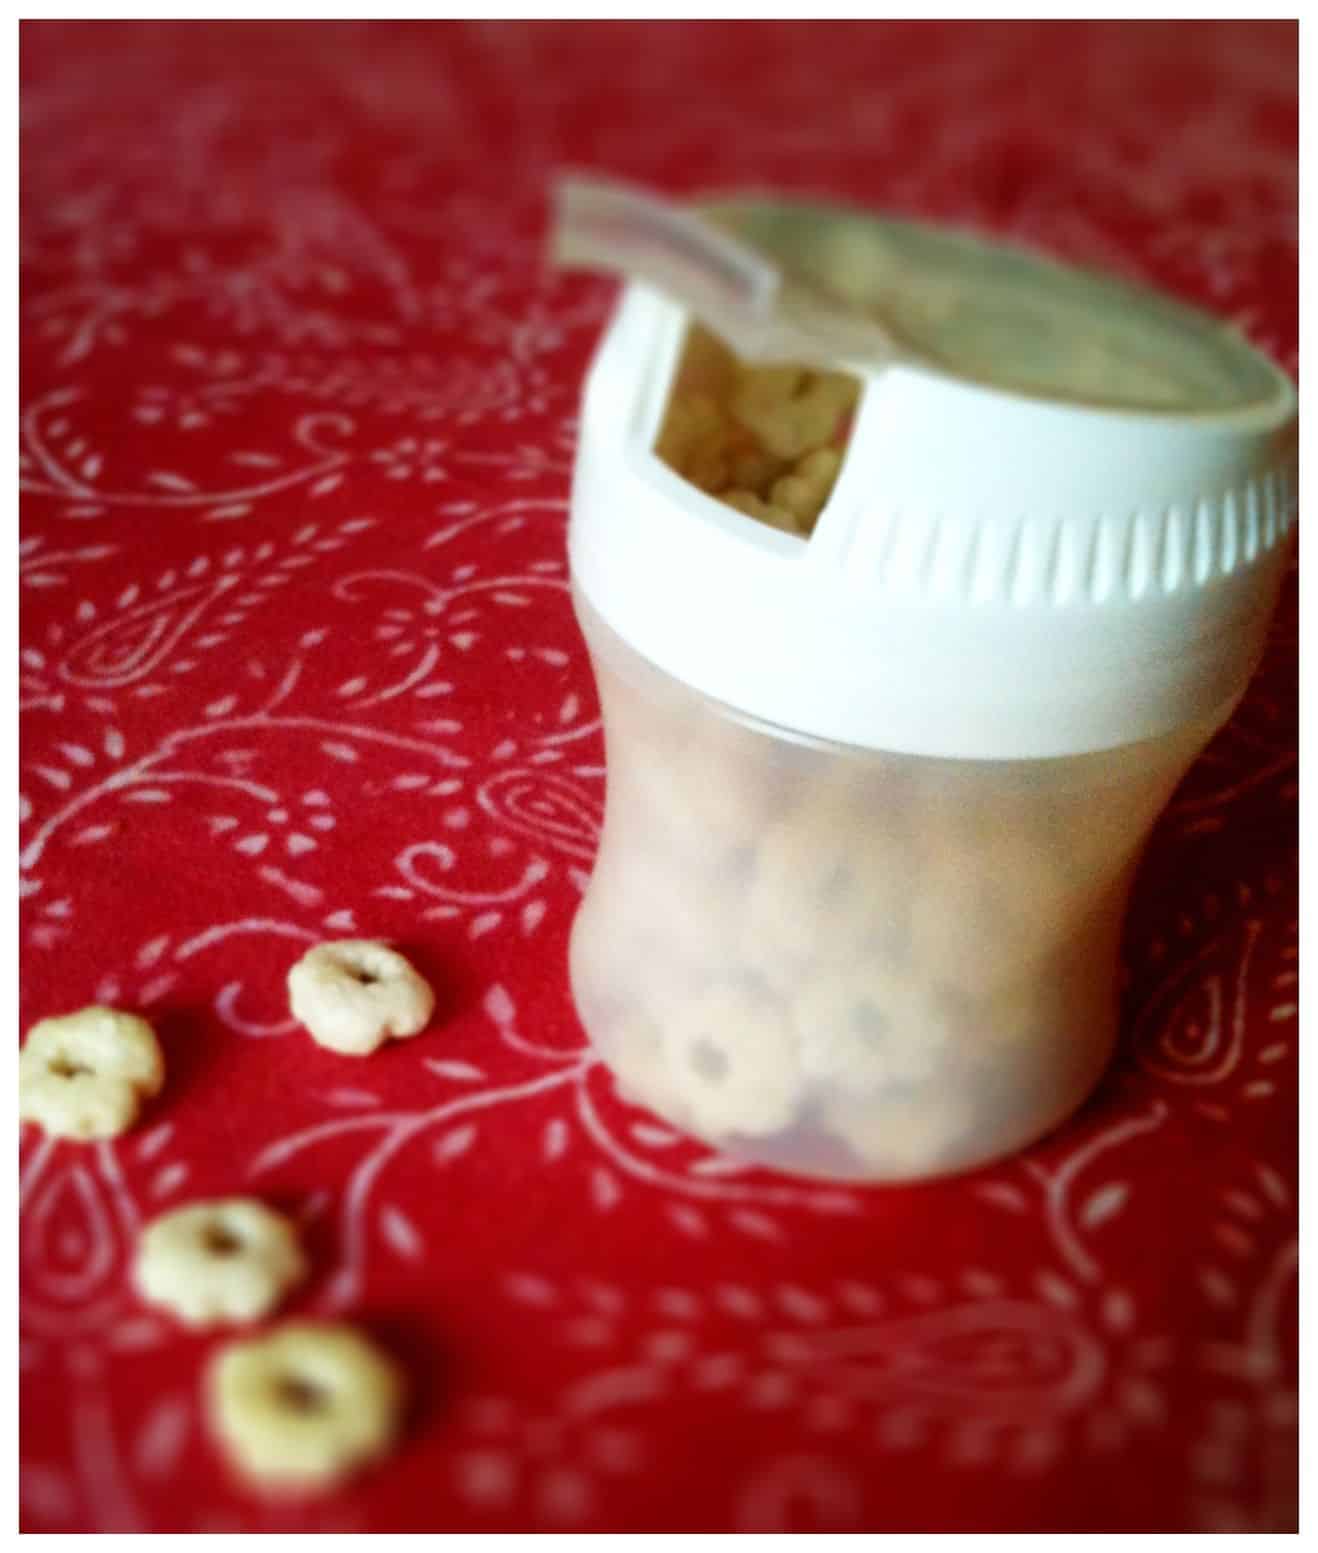 Gum container full of cereal snacks